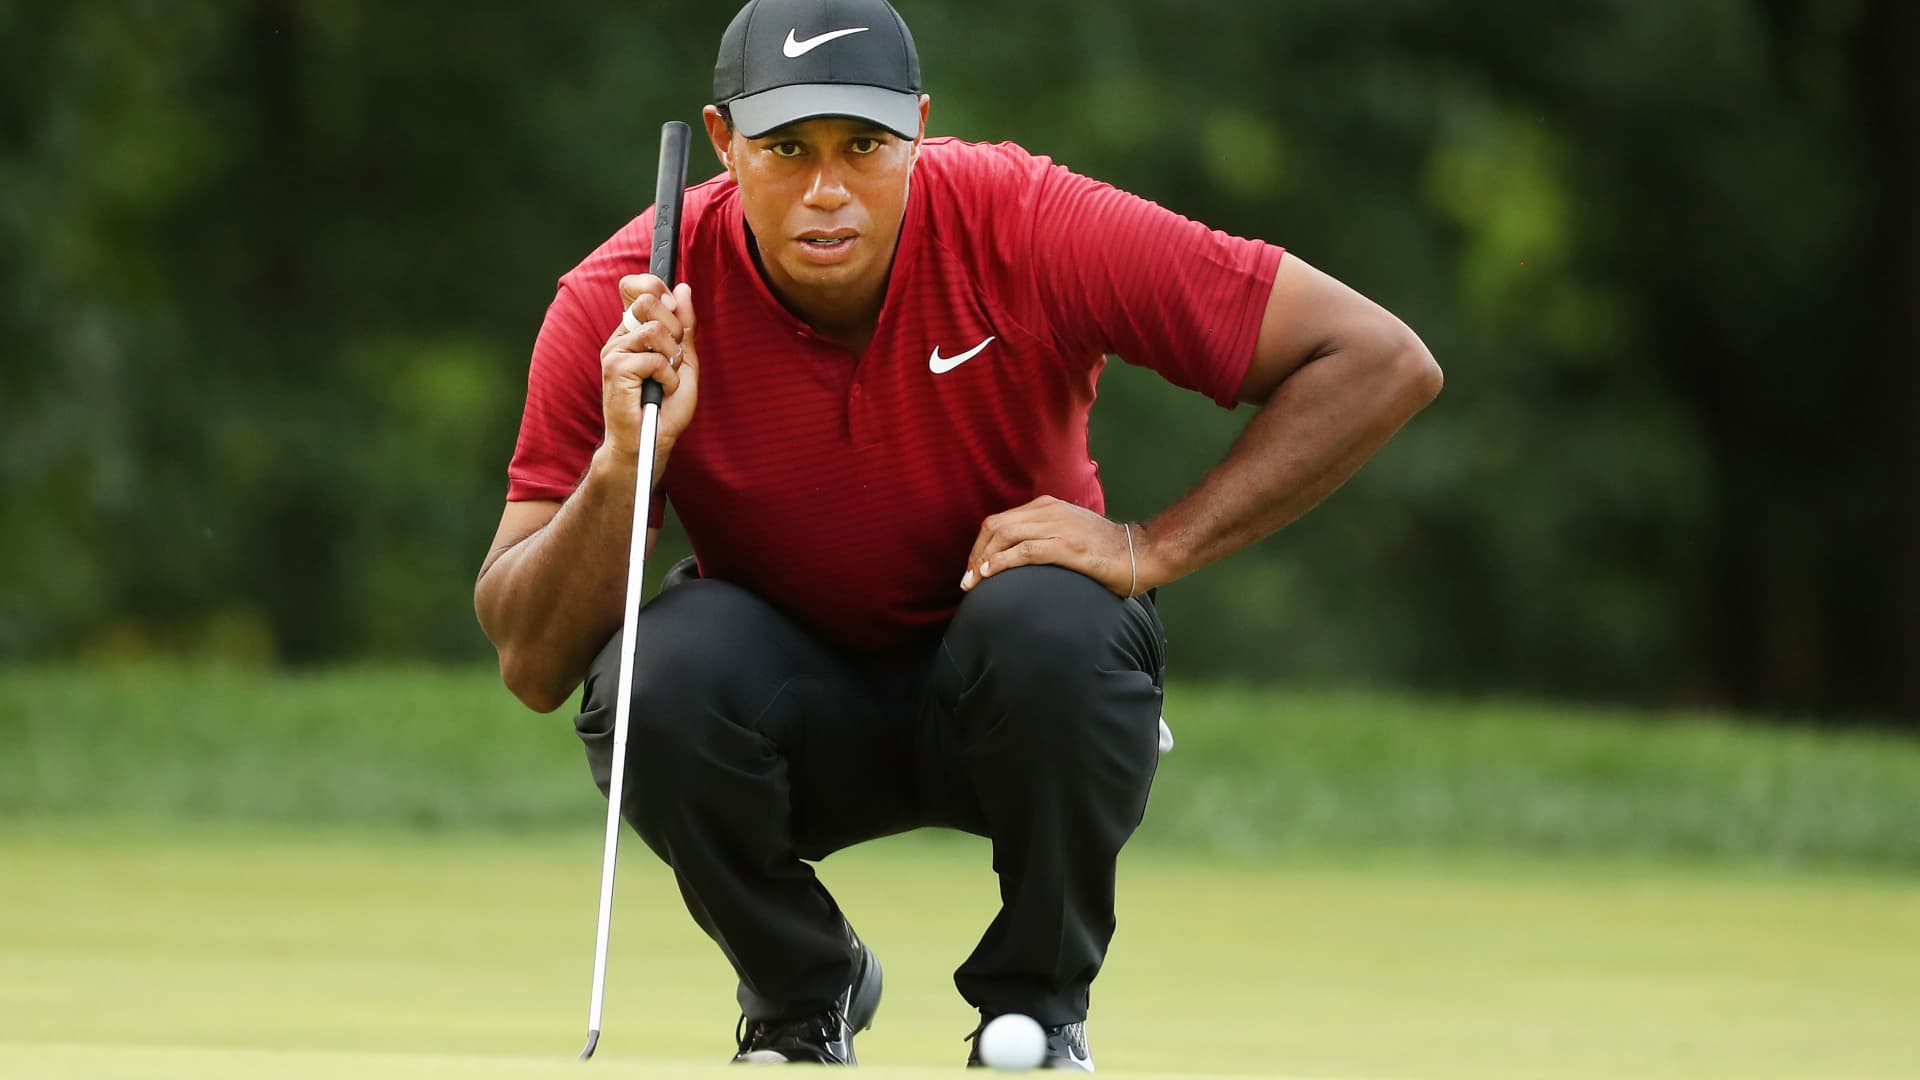 Tiger Woods of the United States lines up a putt on the 16th green during the final round of the 2018 PGA Championship at Bellerive Country Club on August 12, 2018 in St Louis, Missouri.